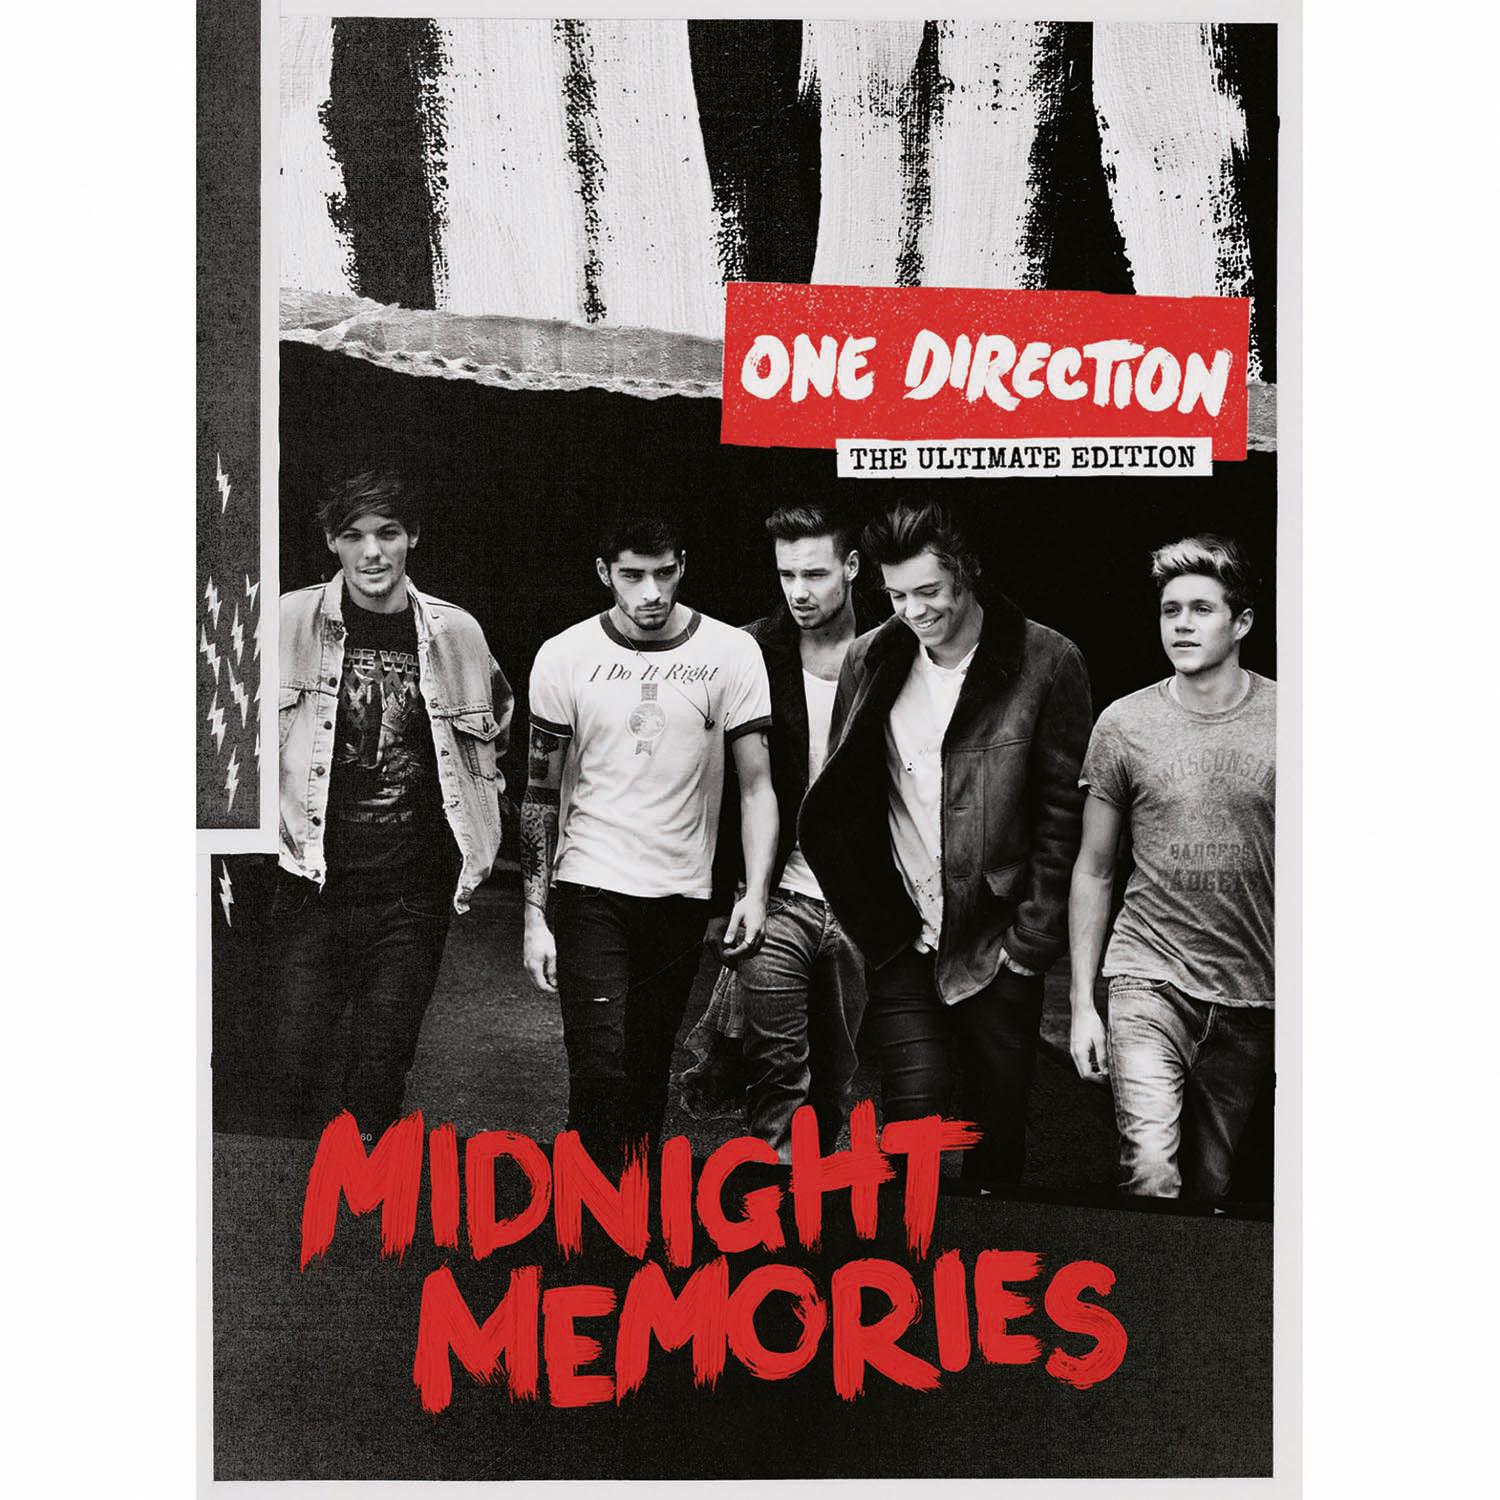 CD One Direction - Midnight Memories (Deluxe) é bom? Vale a pena?